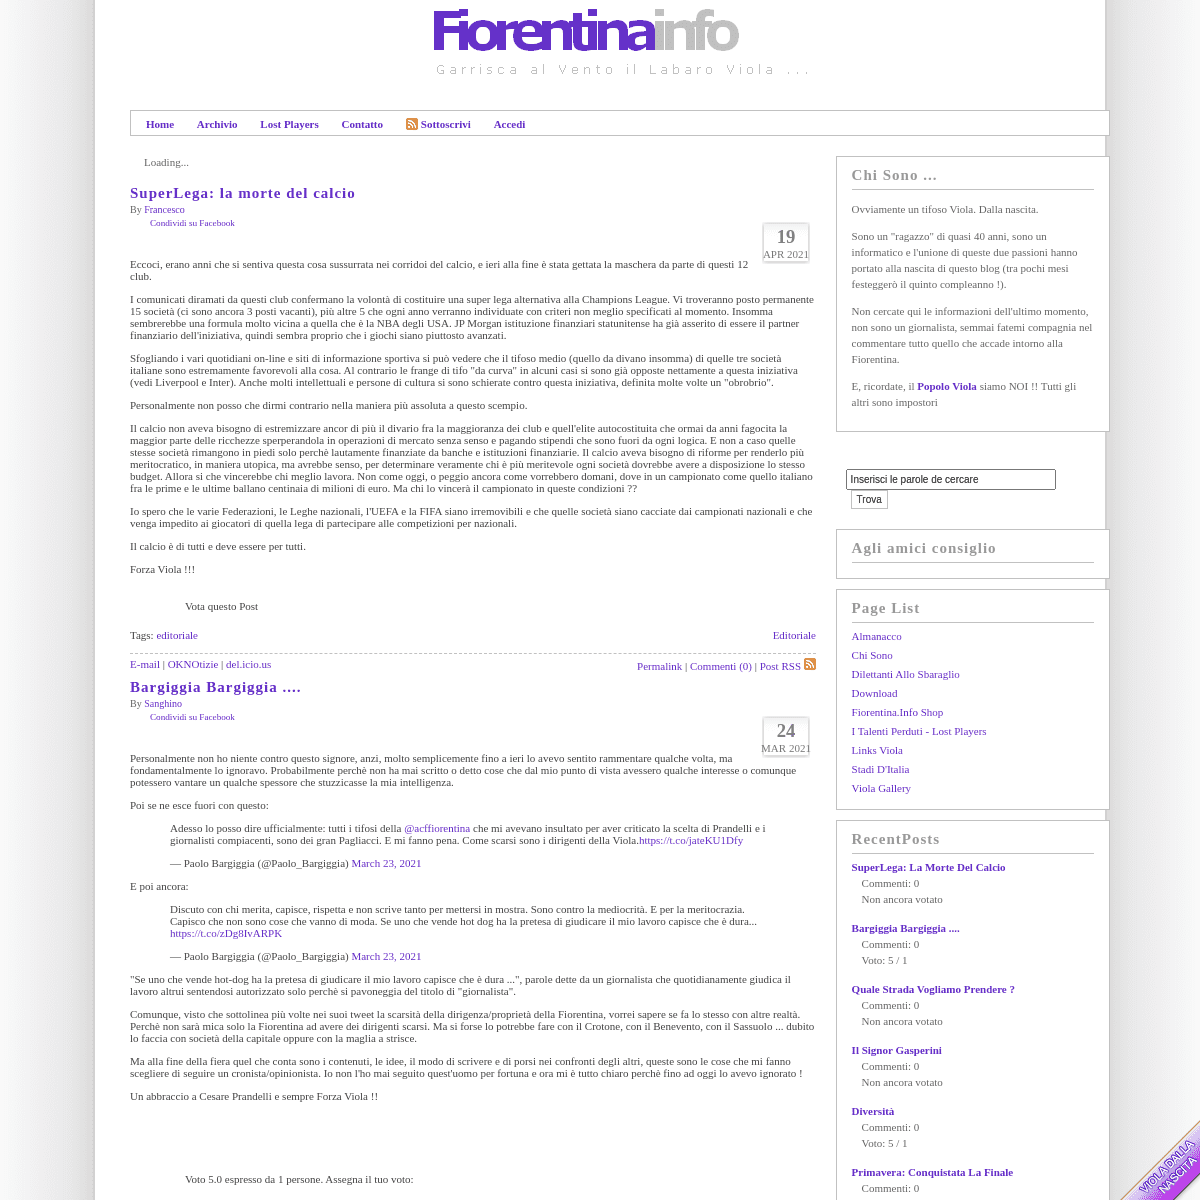 A complete backup of https://fiorentina.info